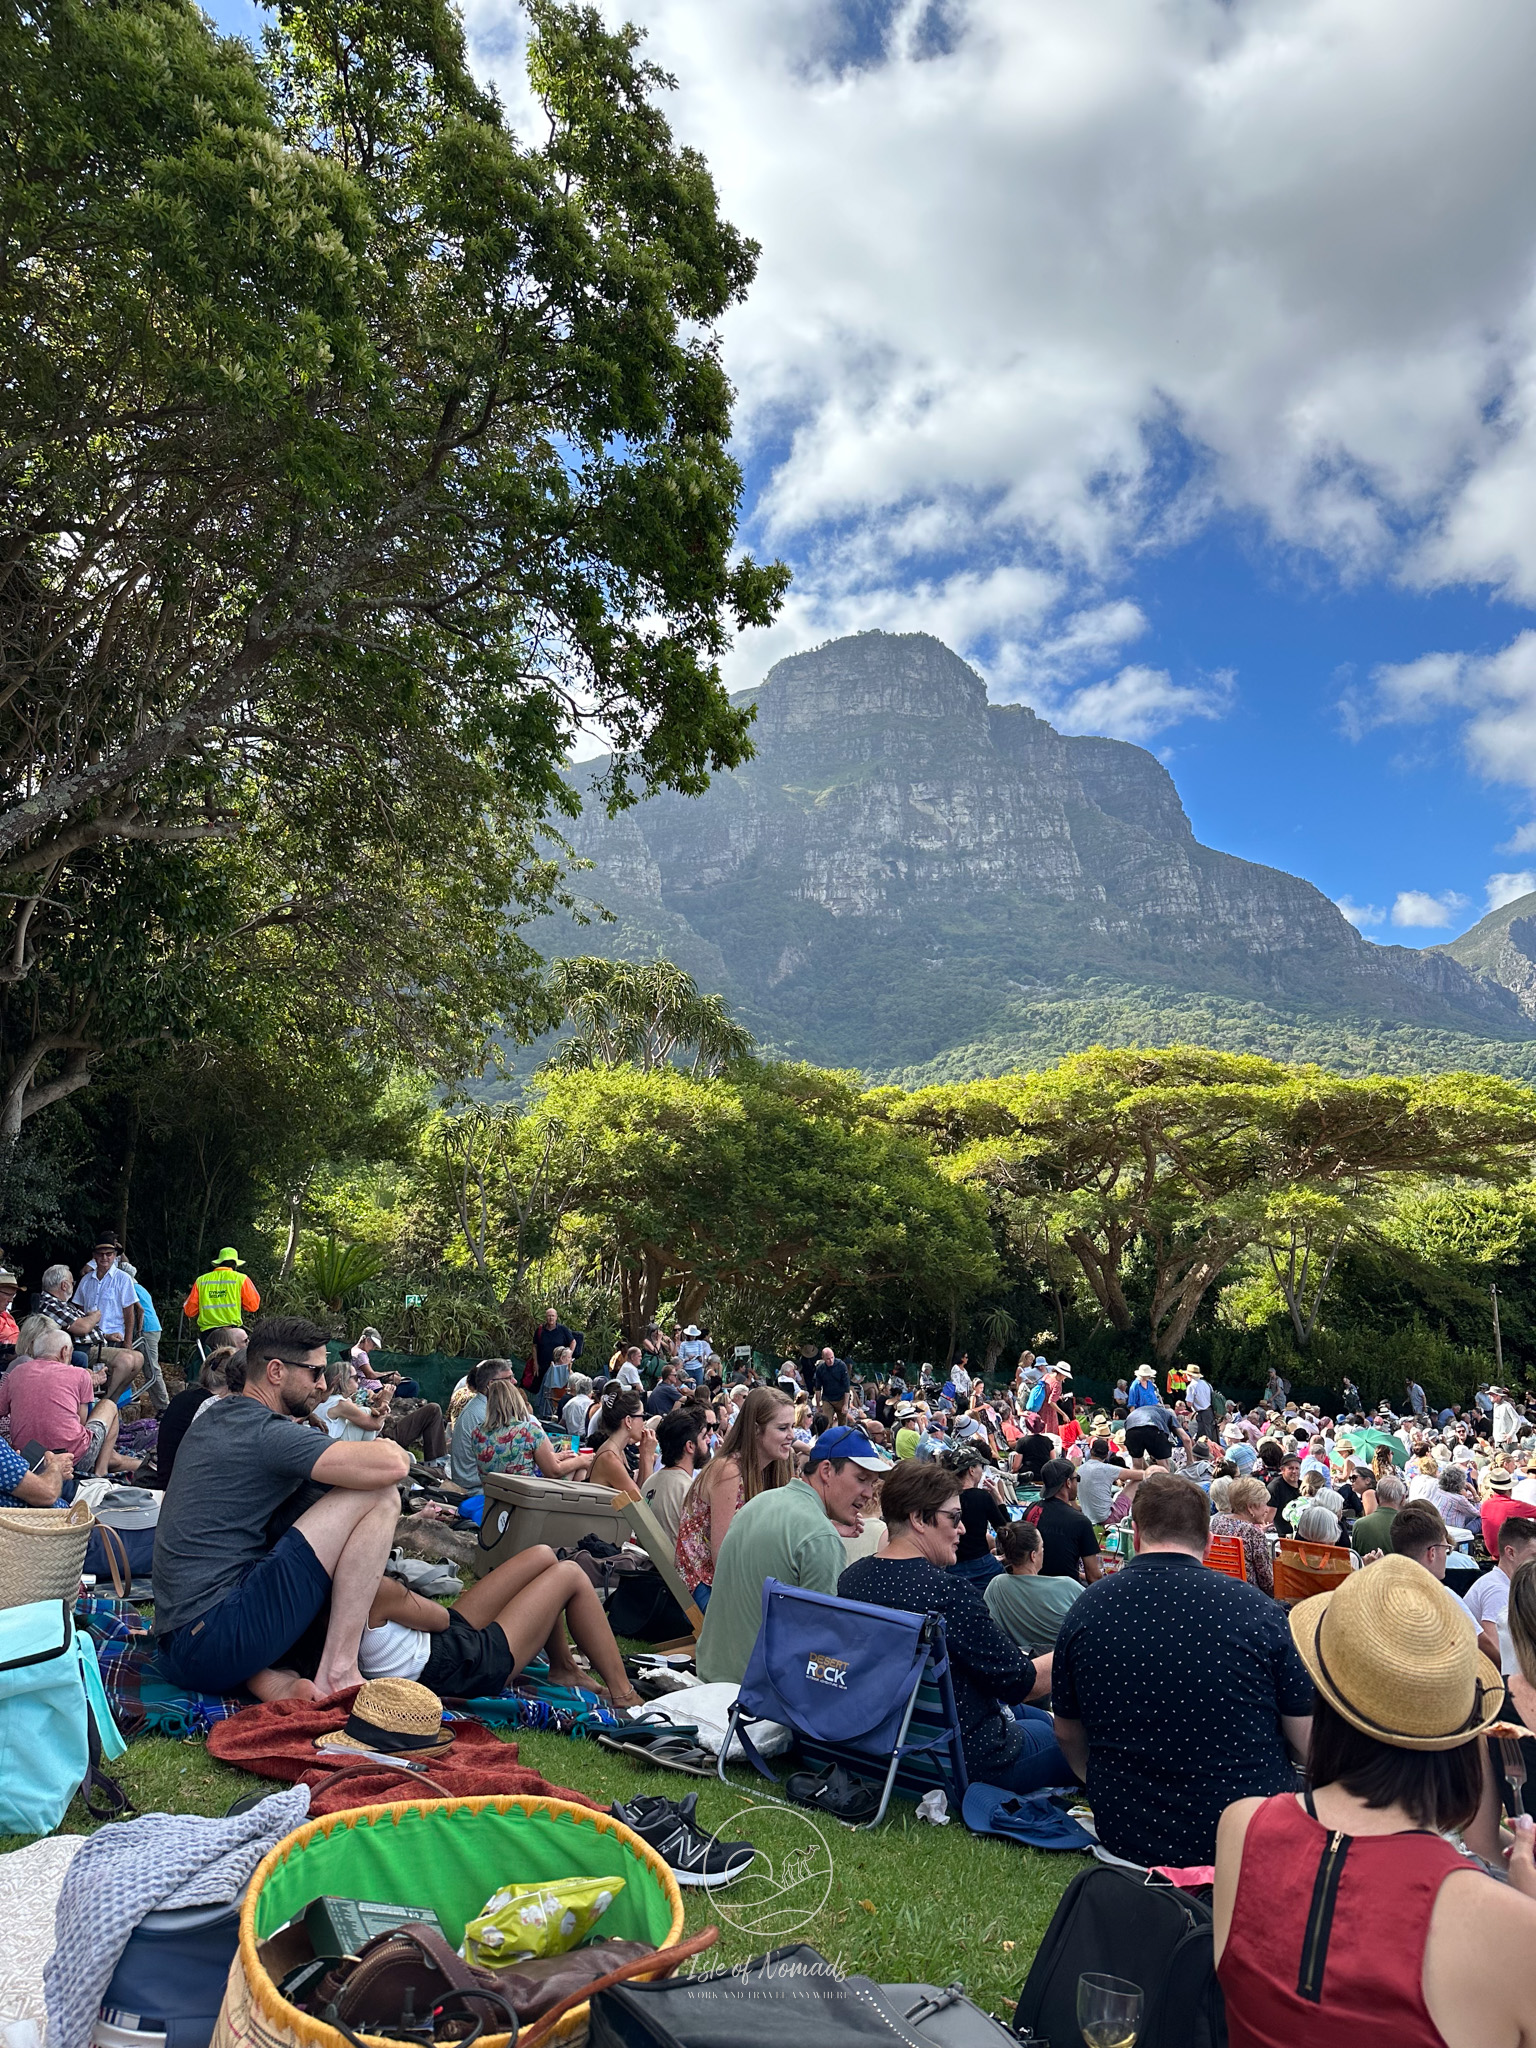 During the summer months, Kirstenbosch holds its famous picnic concerts